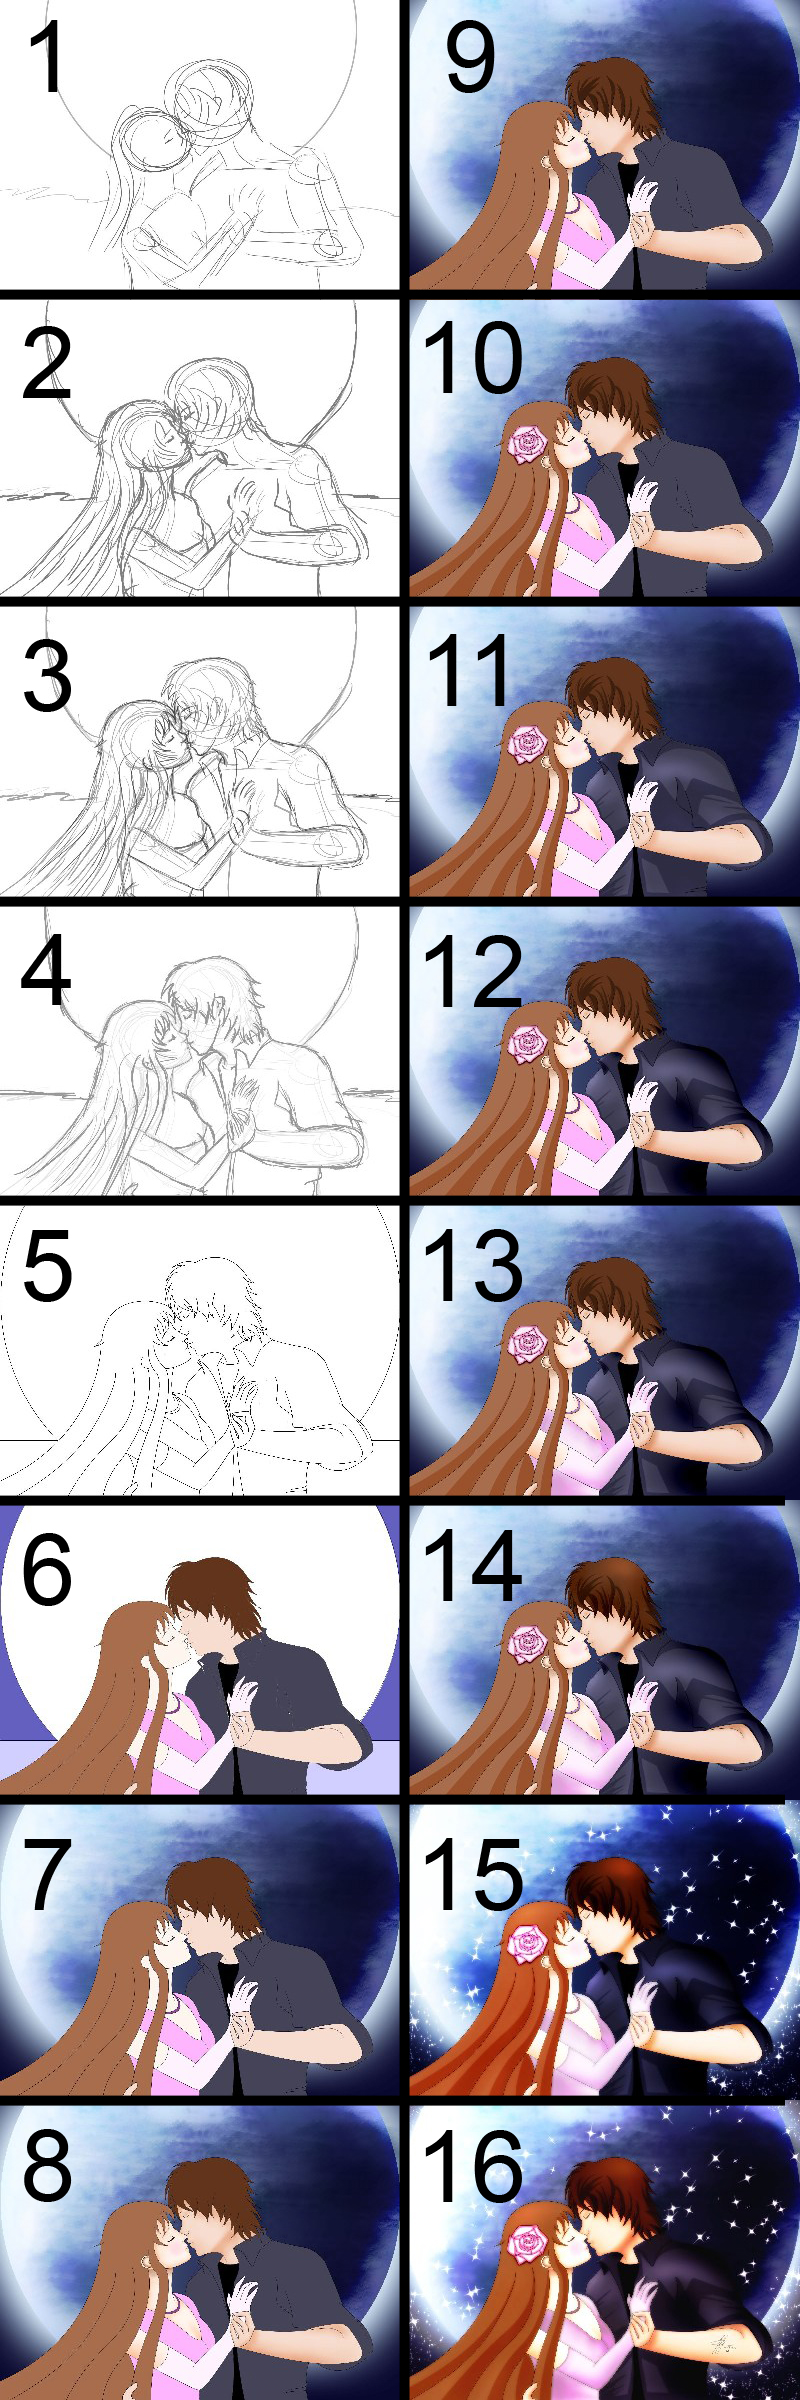 step by step - Romantic couple